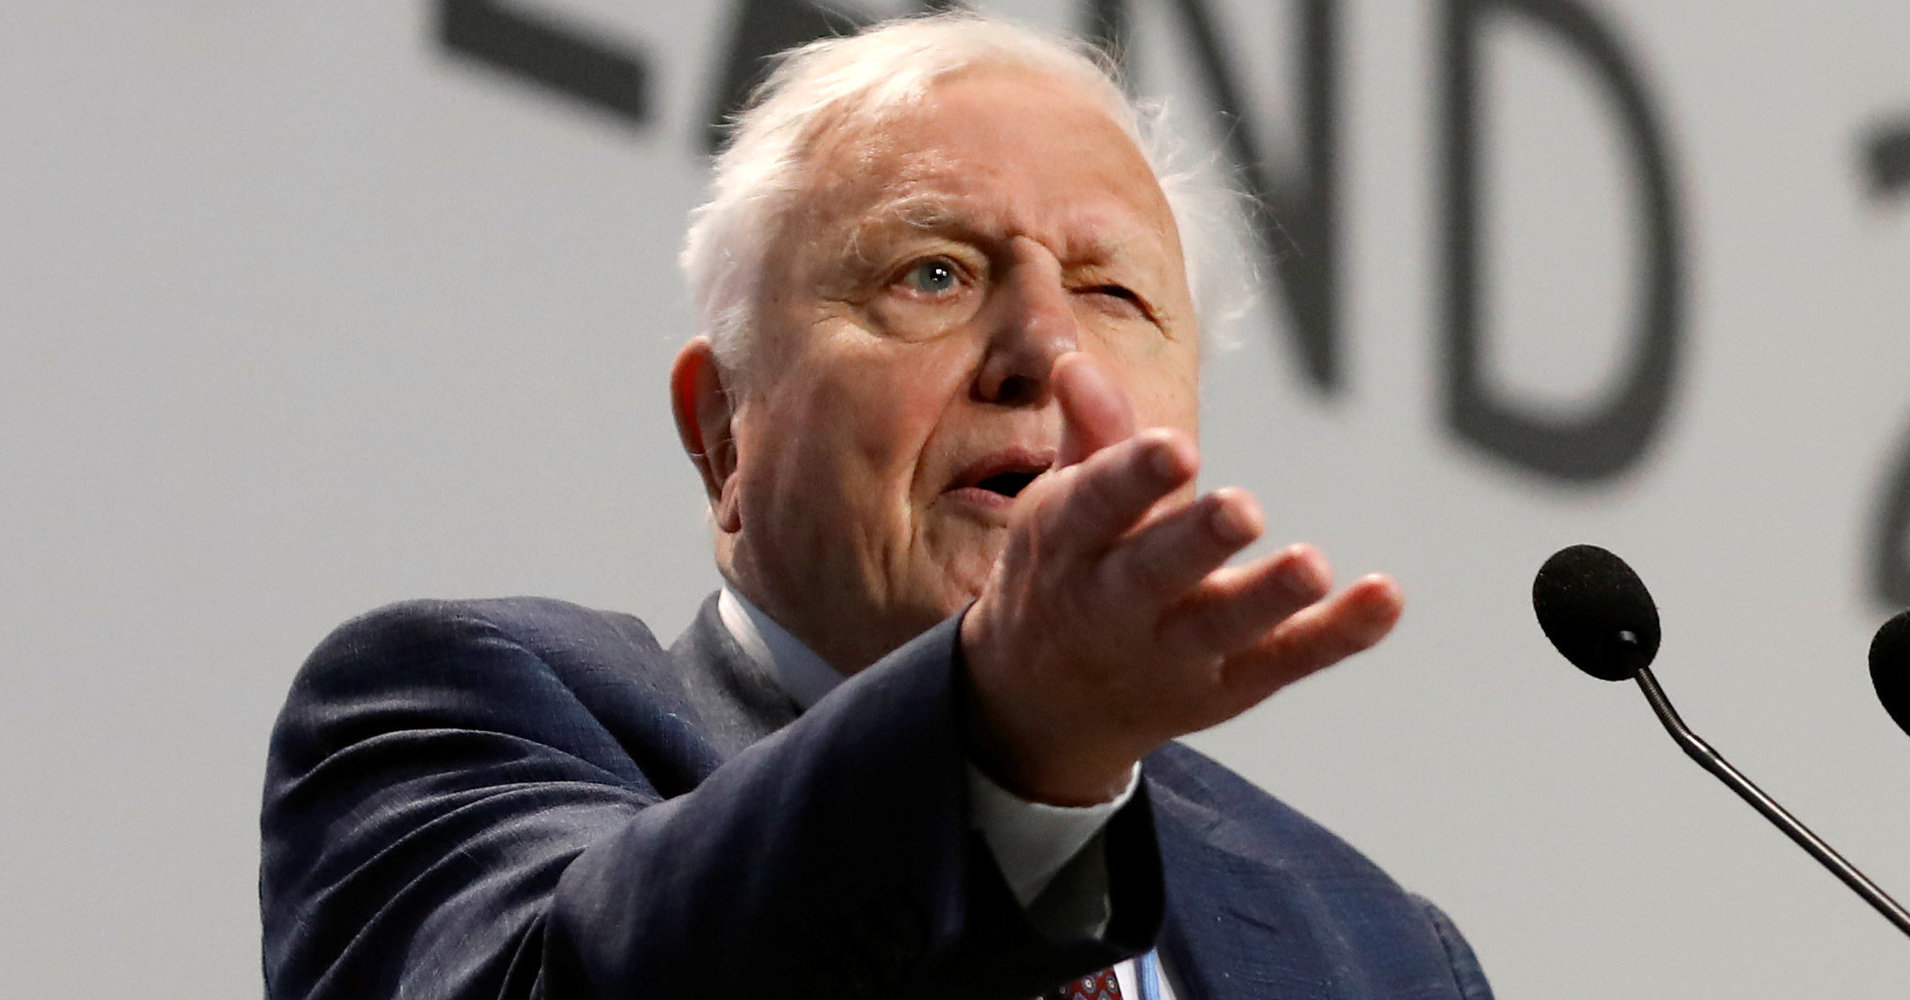 David Attenborough's Dire Climate Warning: ‘Our Greatest Threat In Thousands Of Years'